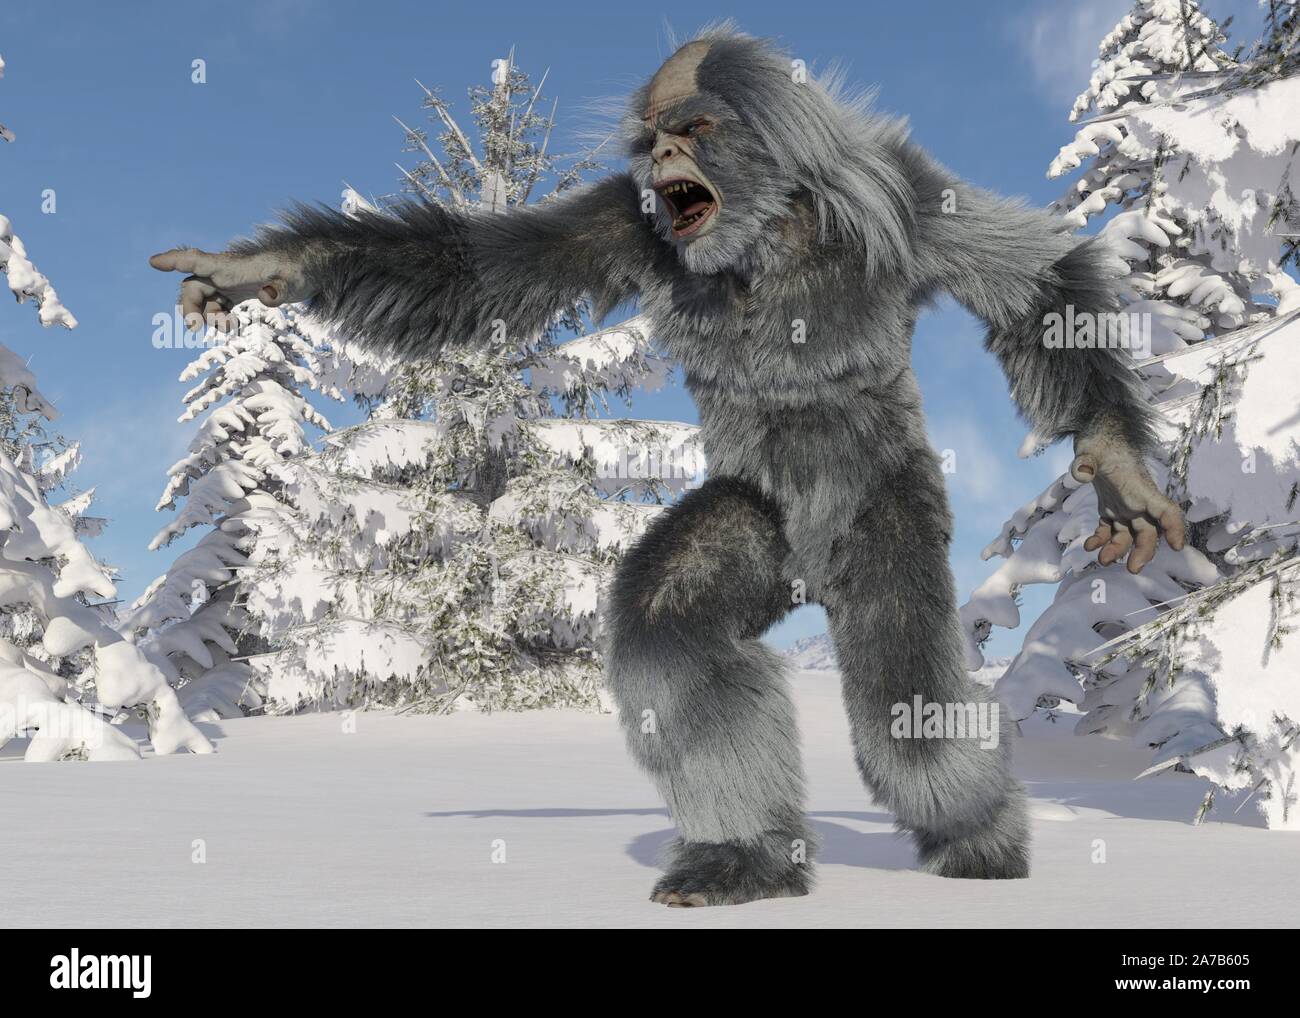 Yeti winter in the forest 3d illustration Stock Photo